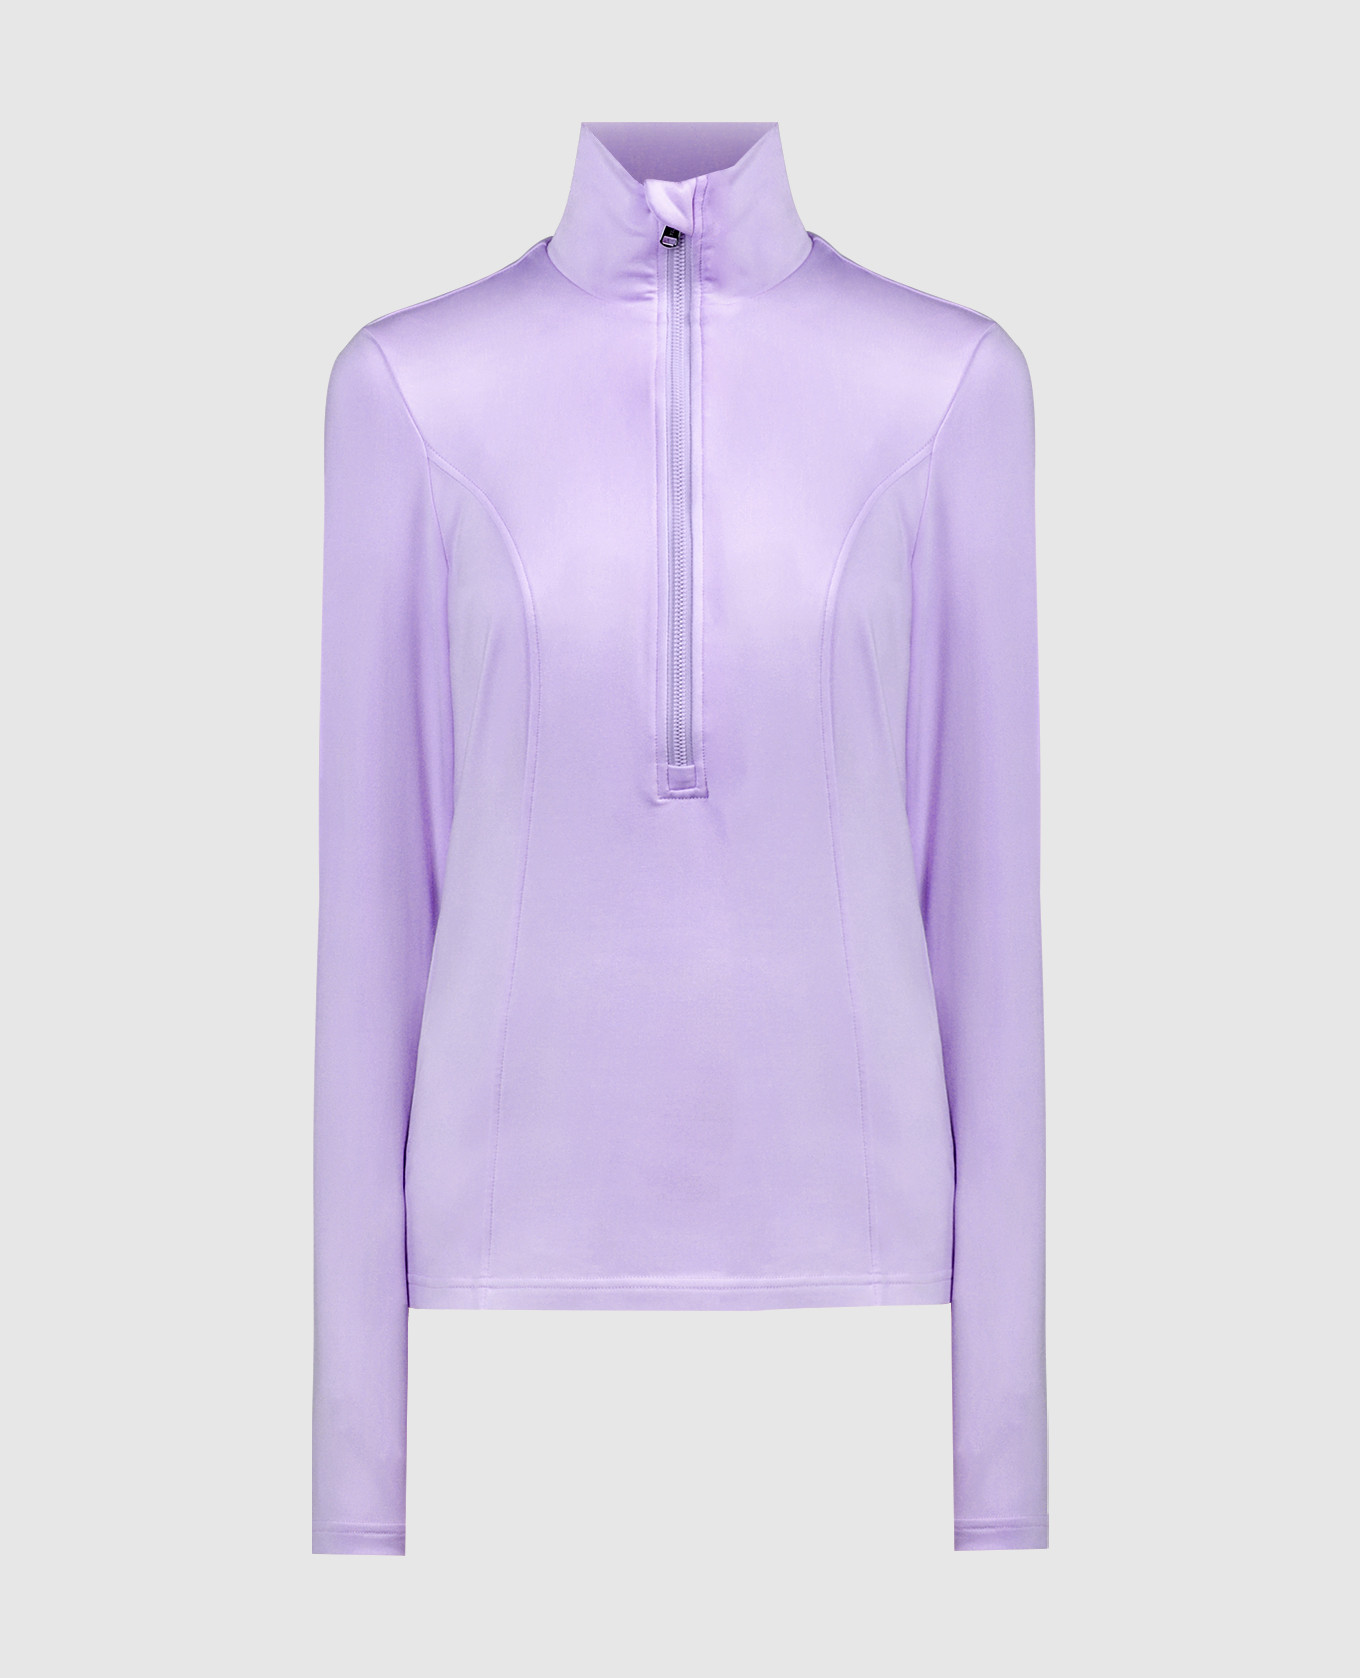 Purple Serena Ski Pully sports jacket with accent stitching